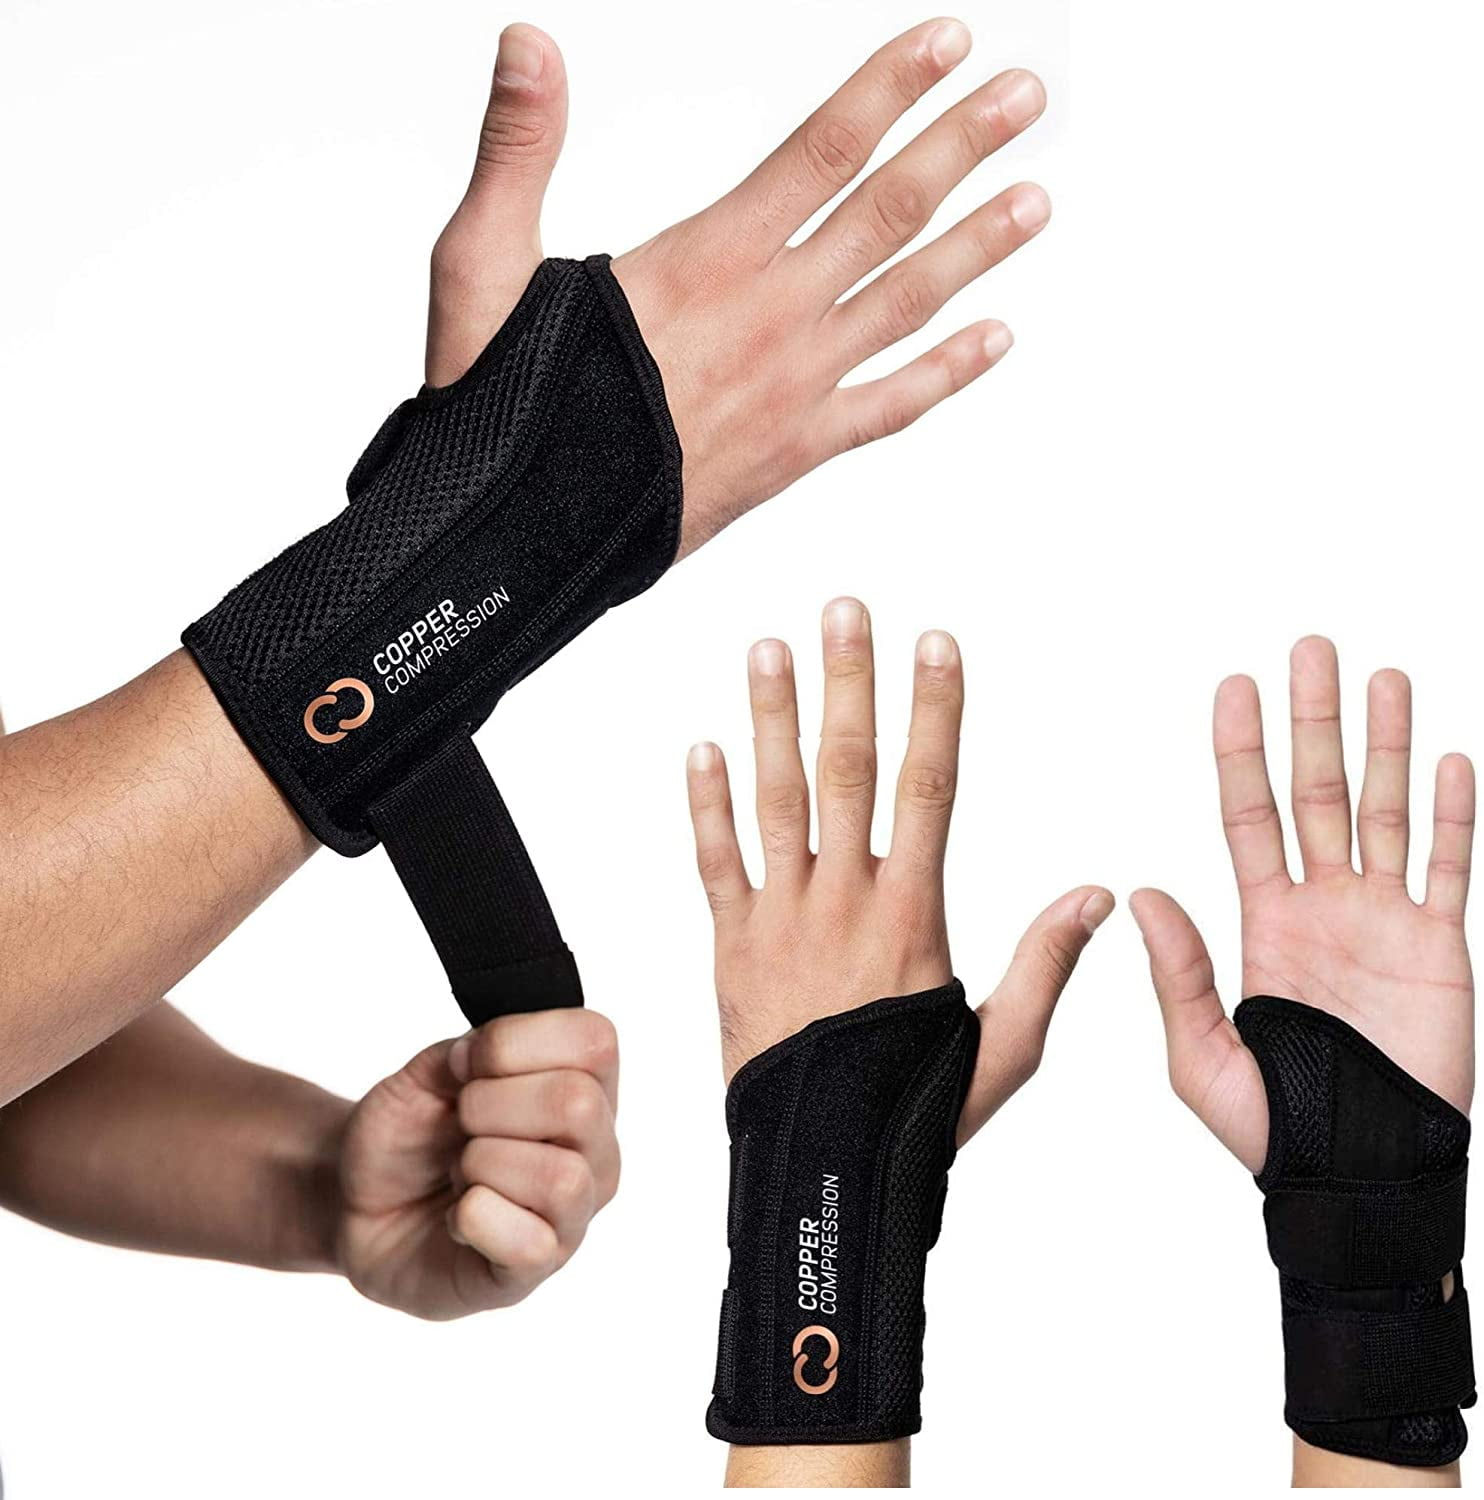 Copper Compression Wrist Brace - Adjustable Support Splint for Pain Relief,  Carpal Tunnel Syndrome, Arthritis, Tendonitis, RSI, Sprain, Arthritis. For  Men and Women - Left Hand S-M 